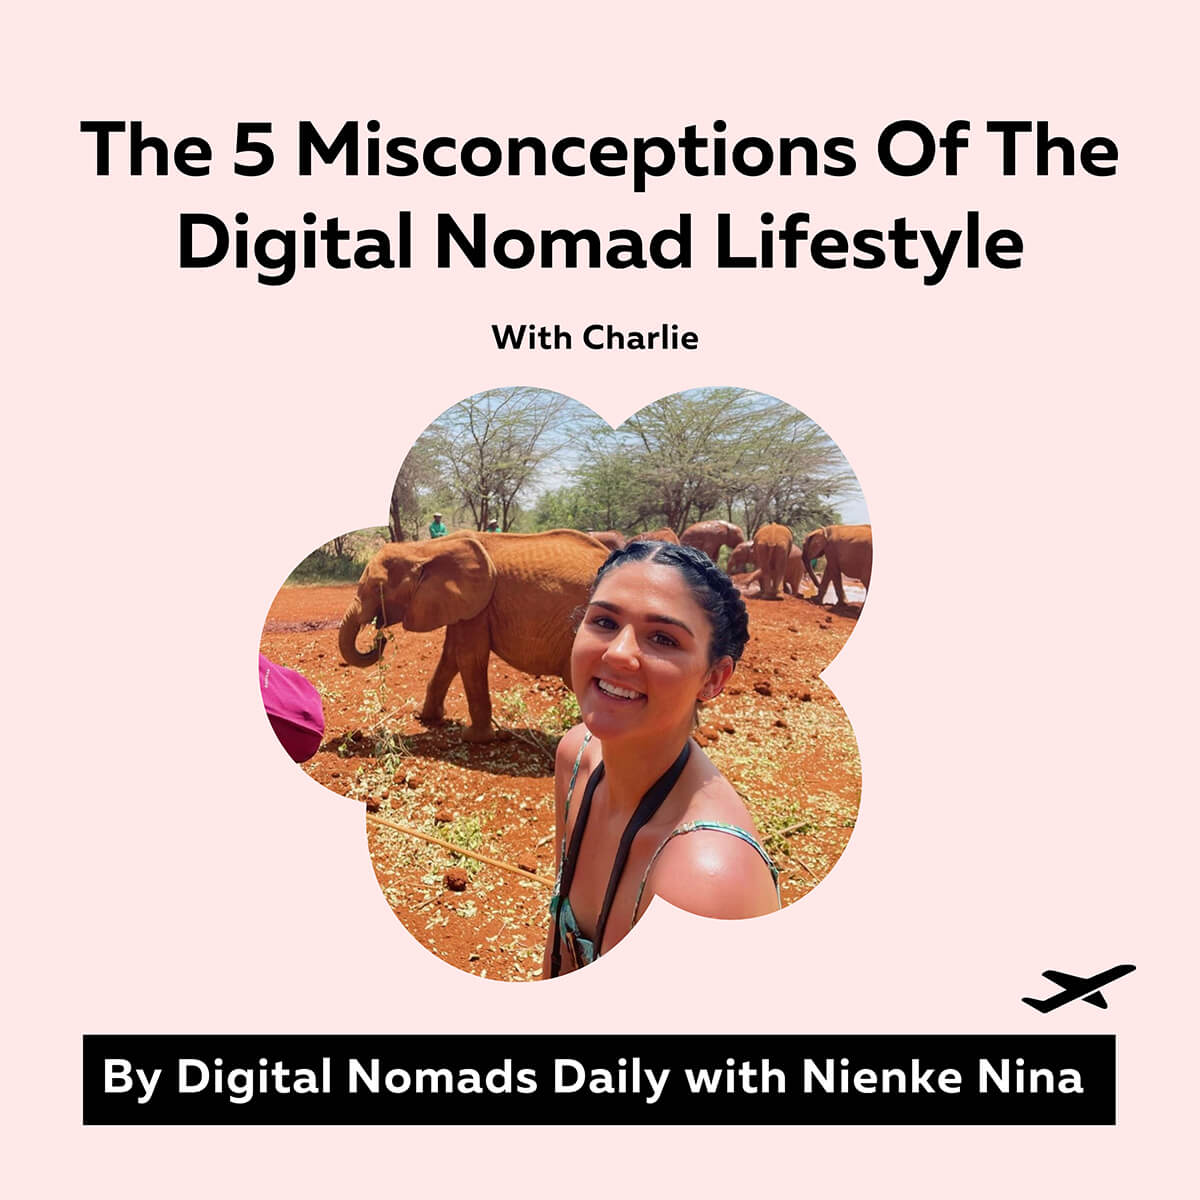 Digital Nomads Daily Podcast episode cover The 5 misconceptions of the digital nomad lifestyle with Charlie